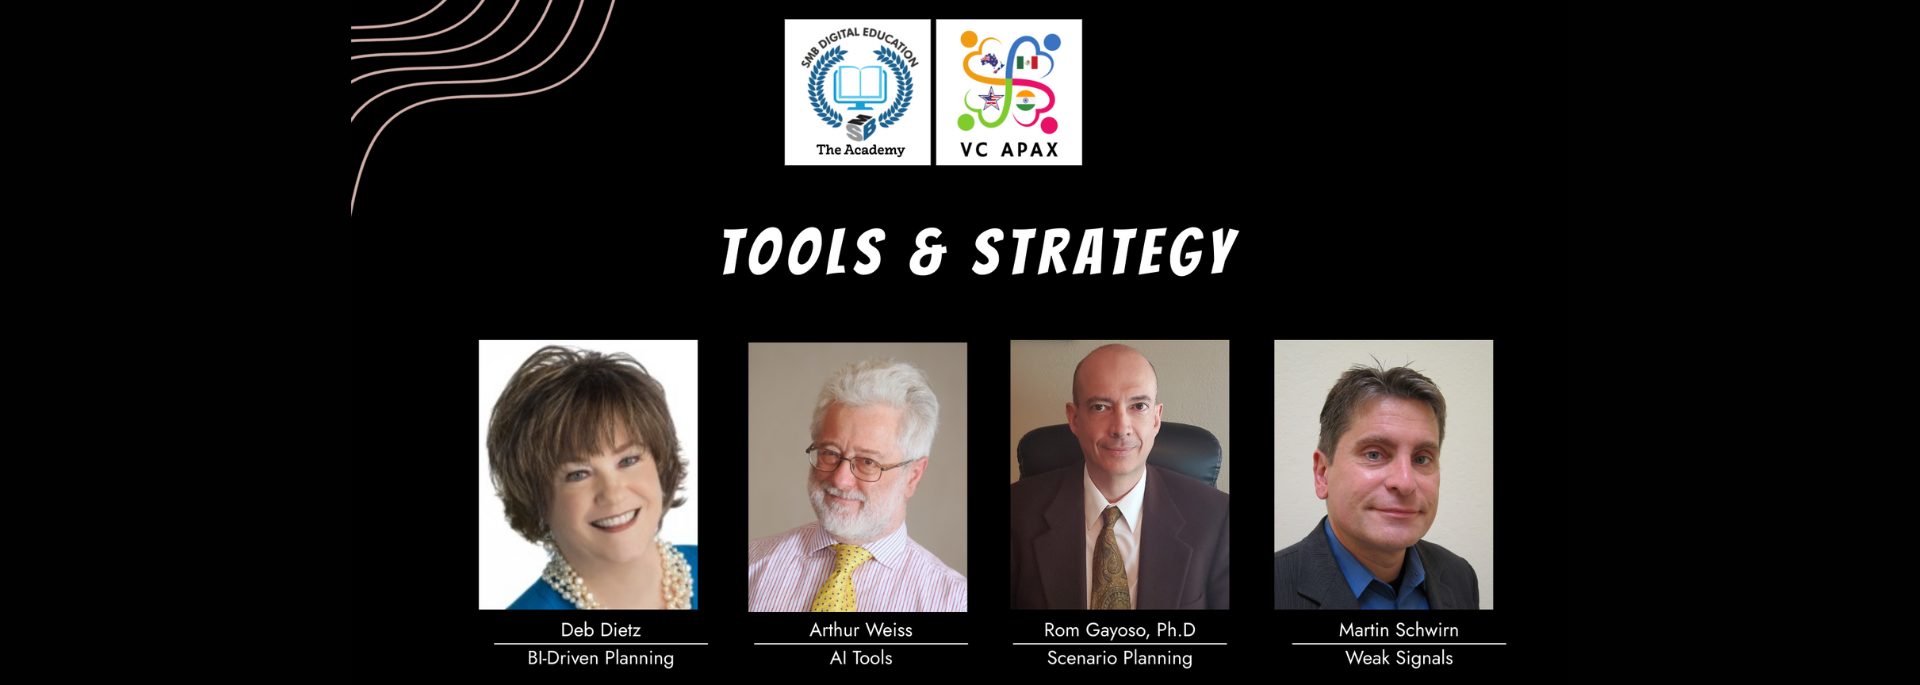 Tools & Strategy